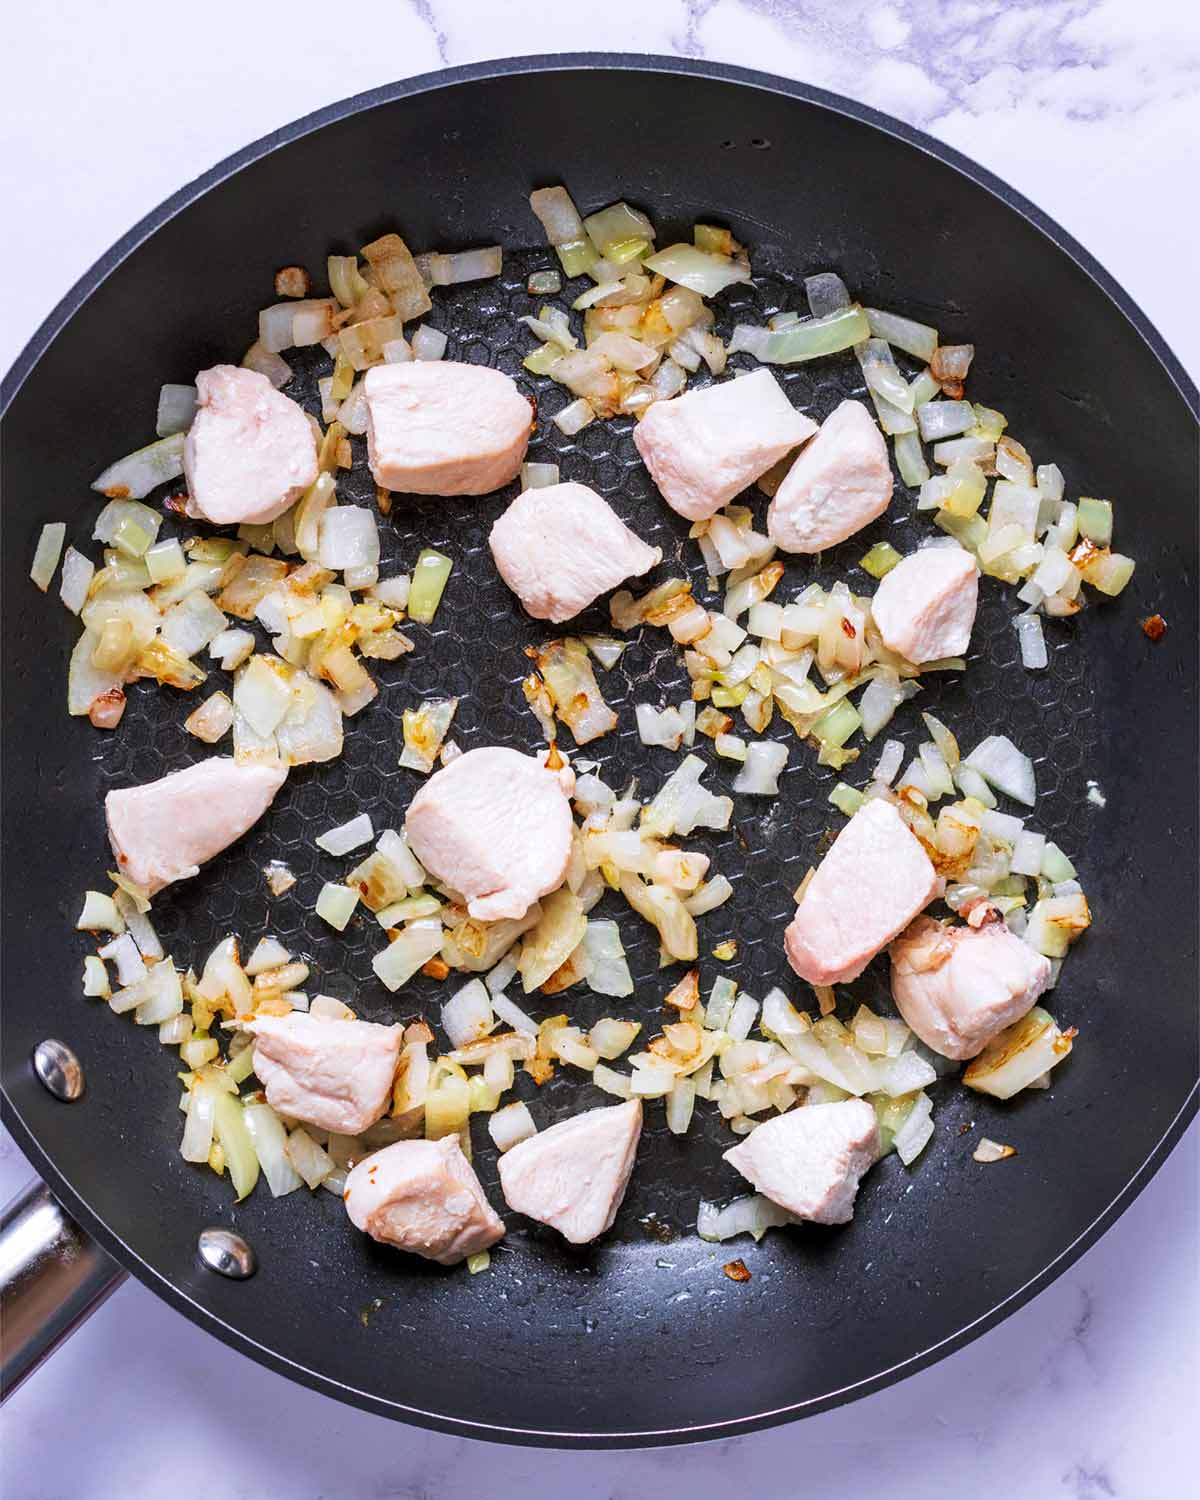 Chunks of chicken and chopped onion cooking in a frying pan.